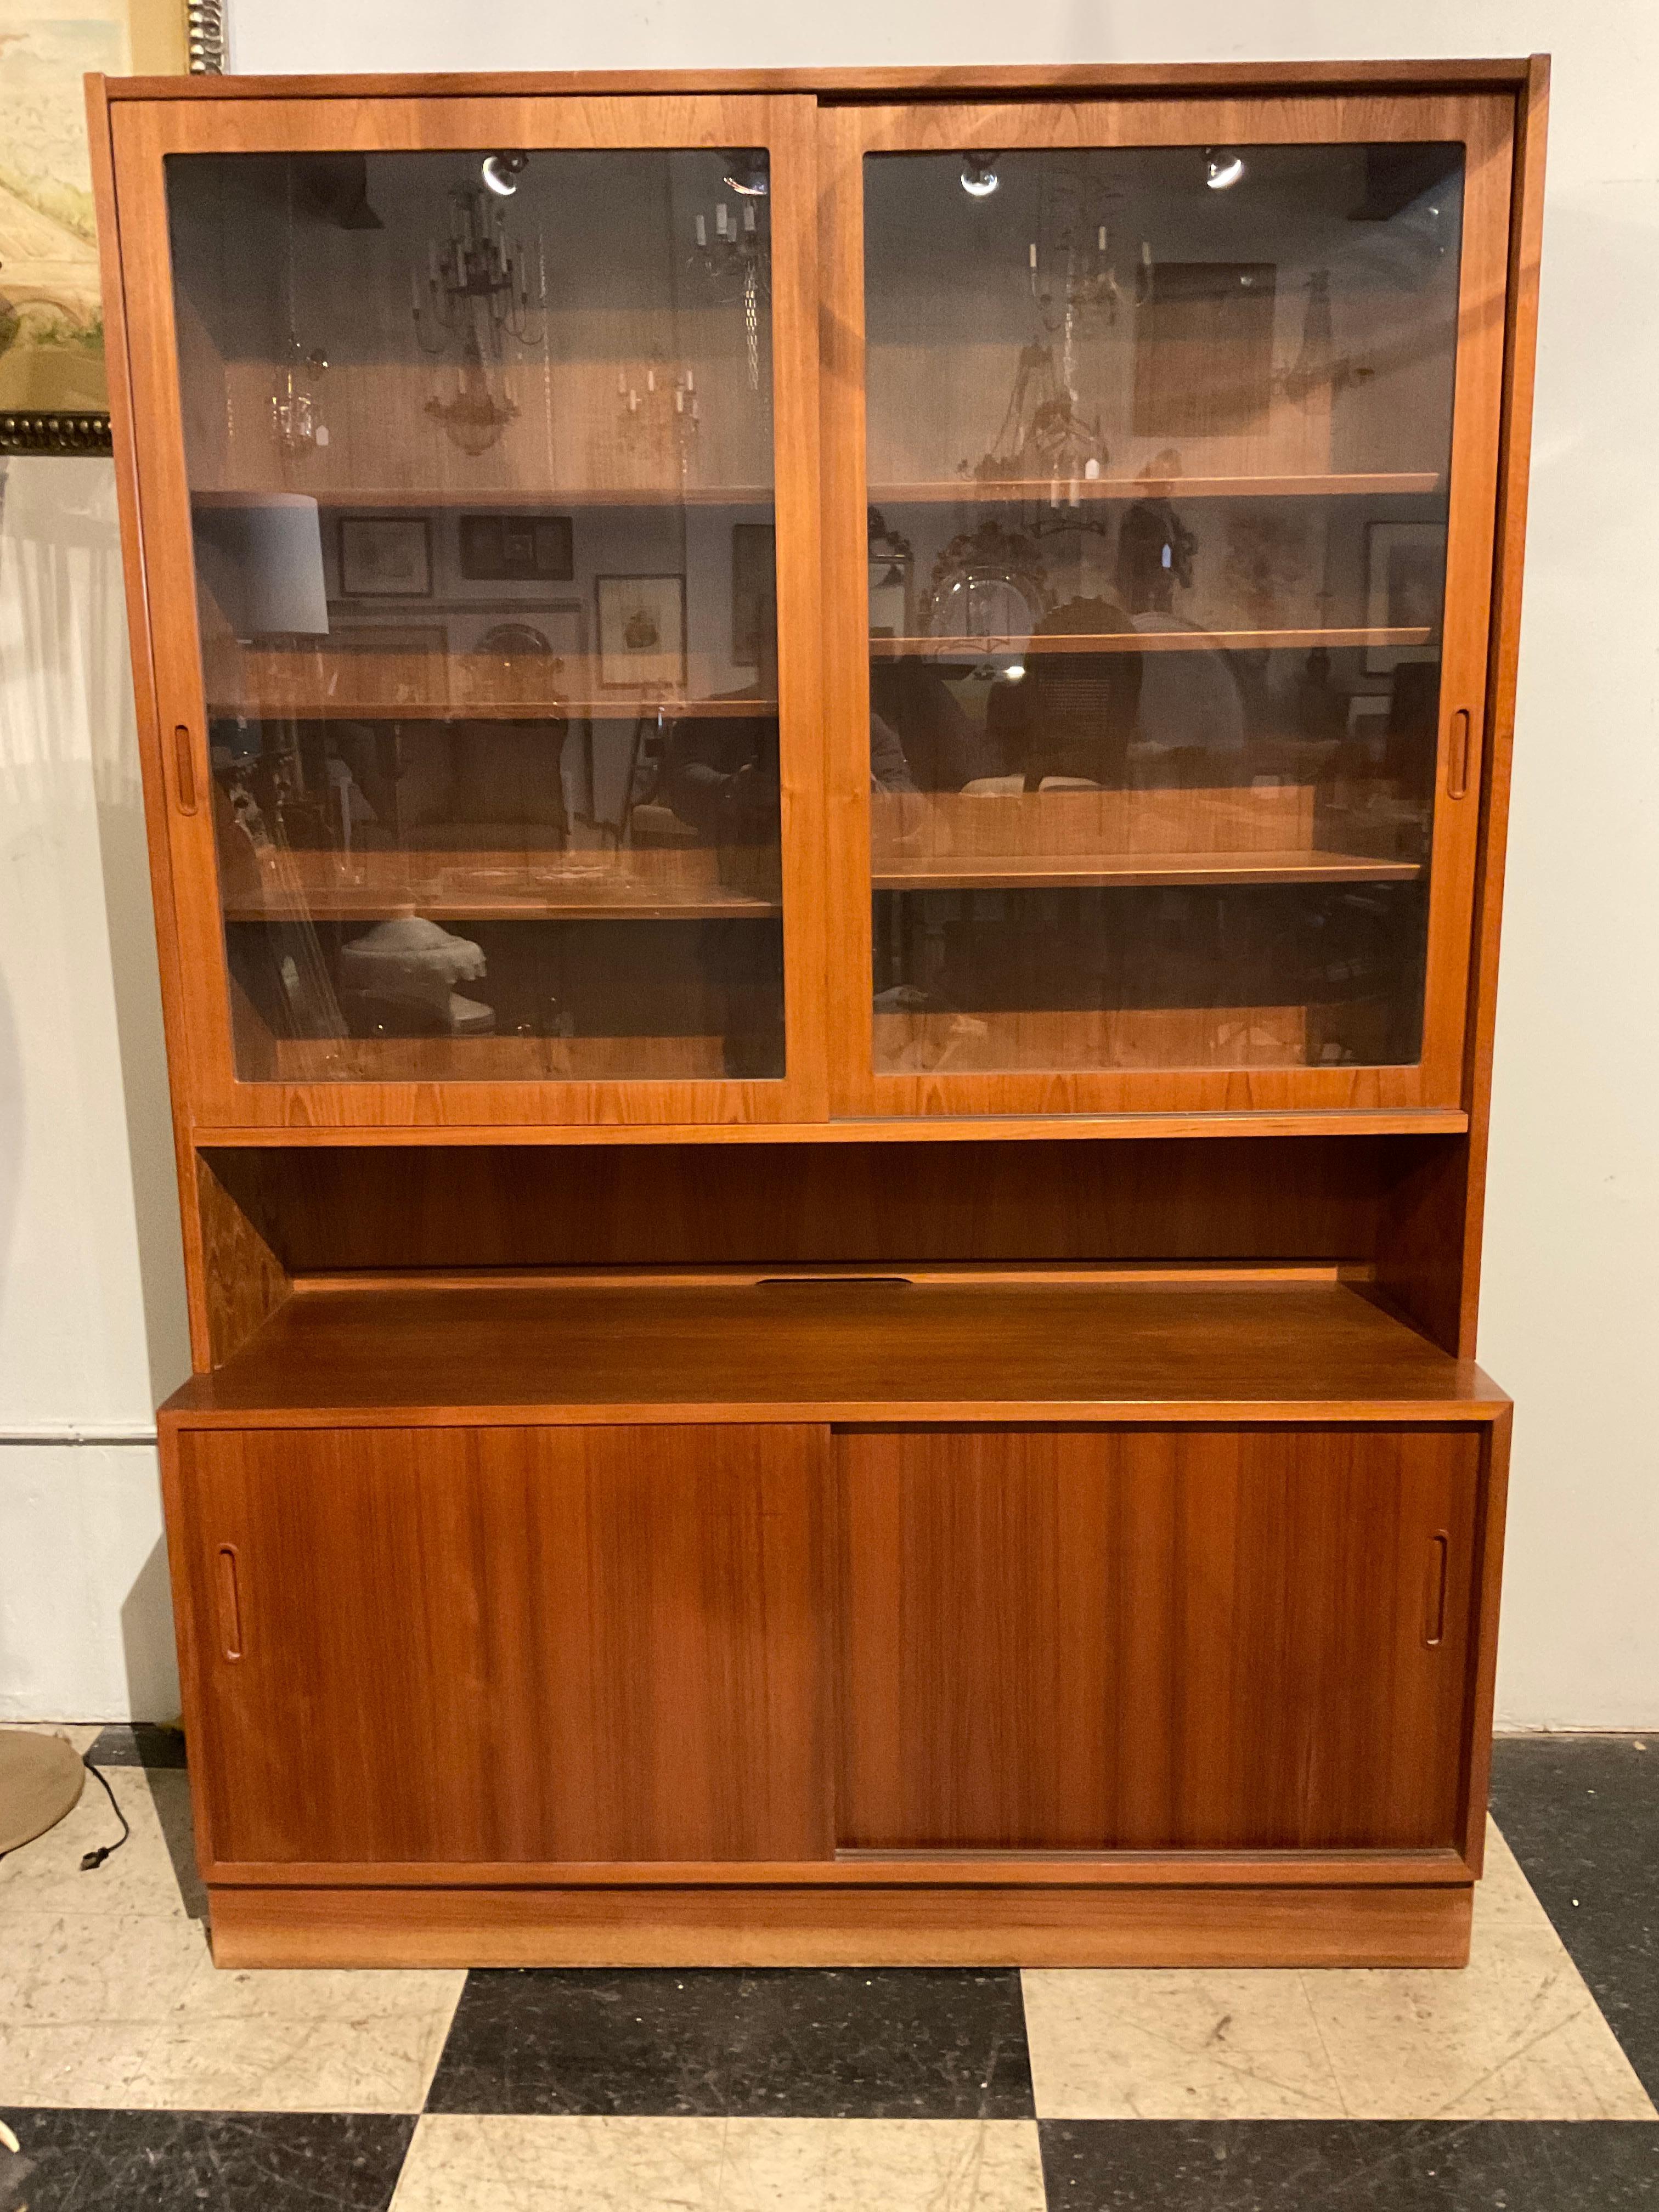 1970s  Poul Hundevad Danish teak  bookcase / china cabinet .  Glass doors. 3 Extra shelves. Scratch on door shown in picture 8. Molding  on base is faded, shown in picture 7.